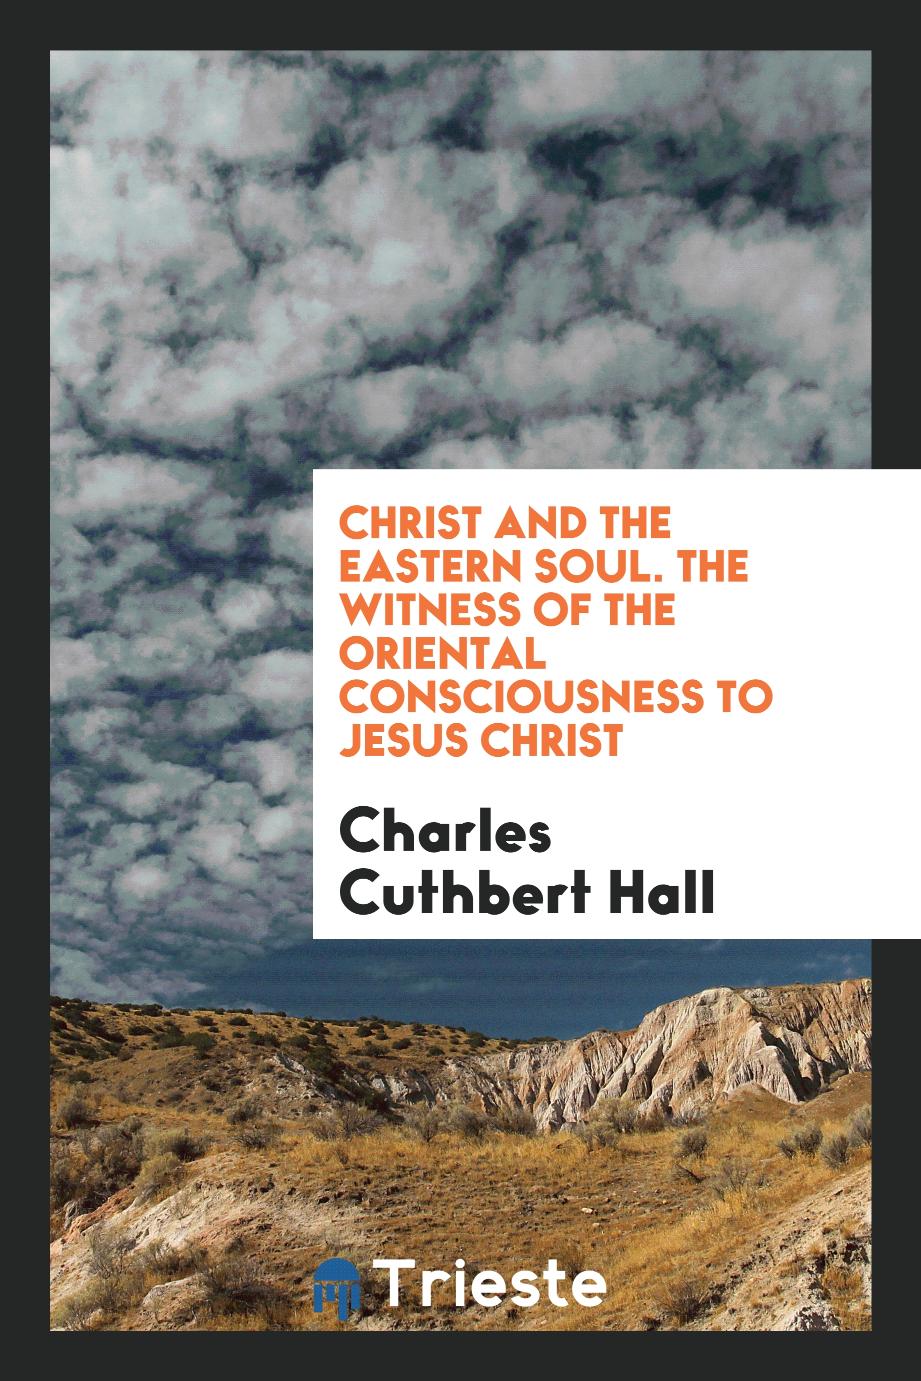 Christ and the eastern soul. The witness of the oriental consciousness to Jesus Christ